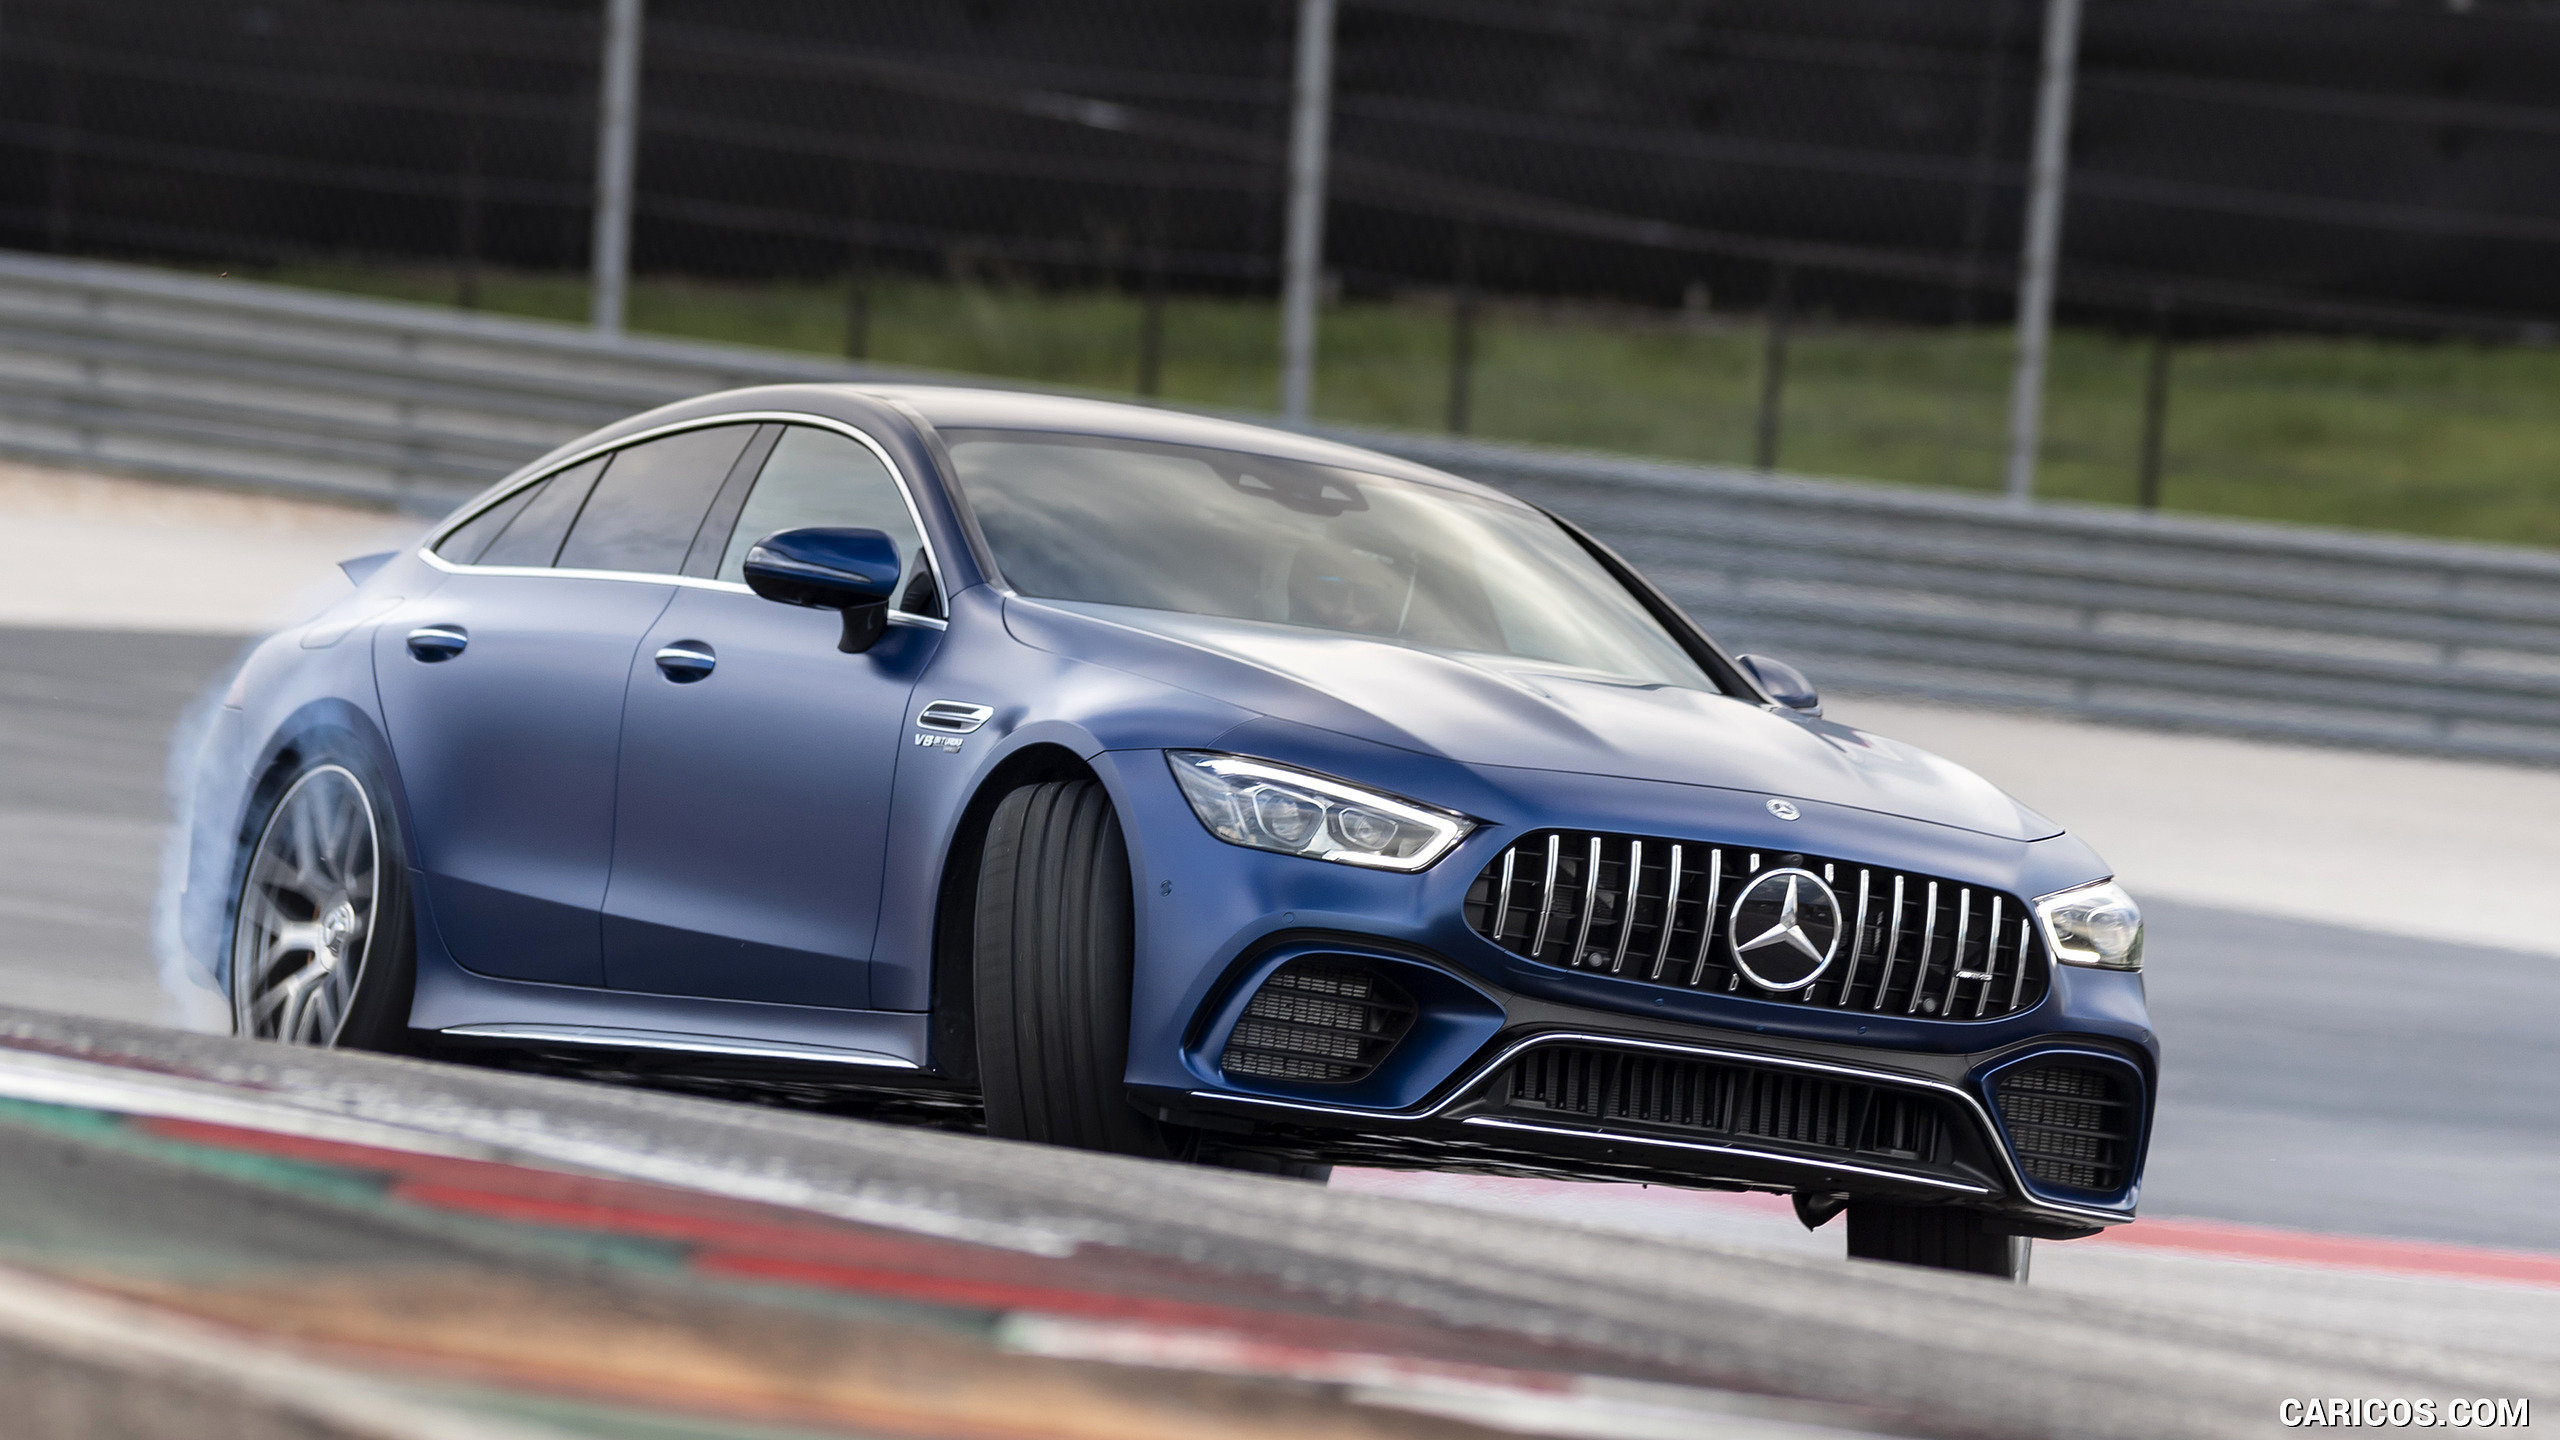 2019 Mercedes-AMG GT 63 S 4MATIC+ 4-Door Coupe - Front Three-Quarter, #105 of 427